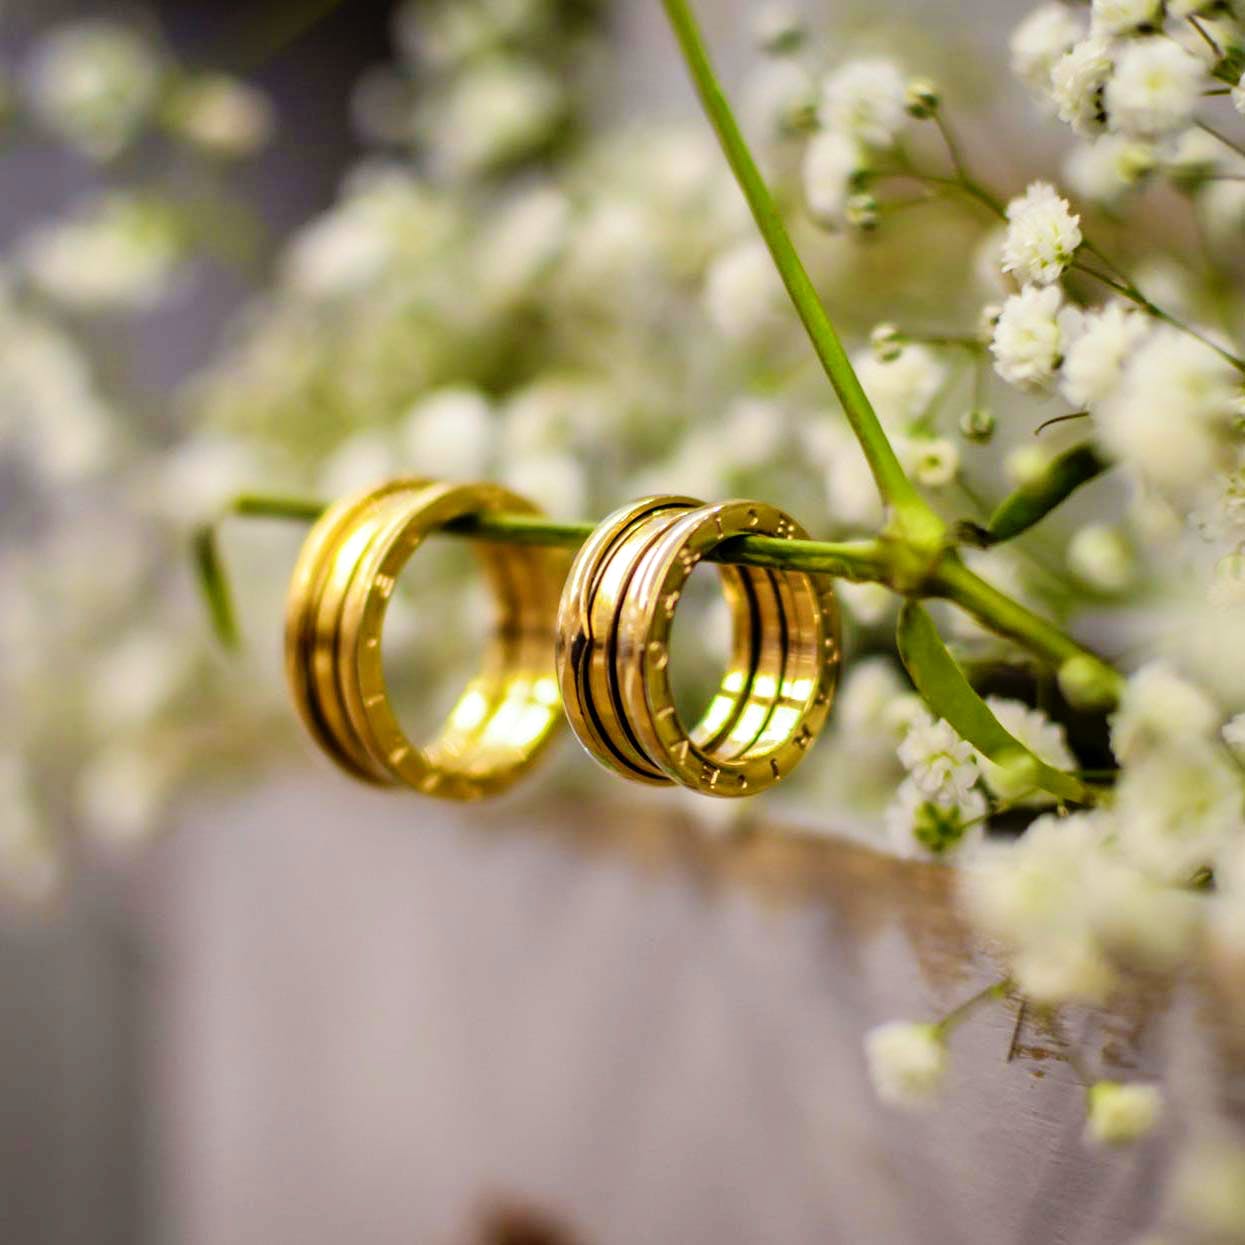 Yellow,Wedding ceremony supply,Flower,Plant,Spring,Metal,Wedding ring,Photography,Brass,Fashion accessory